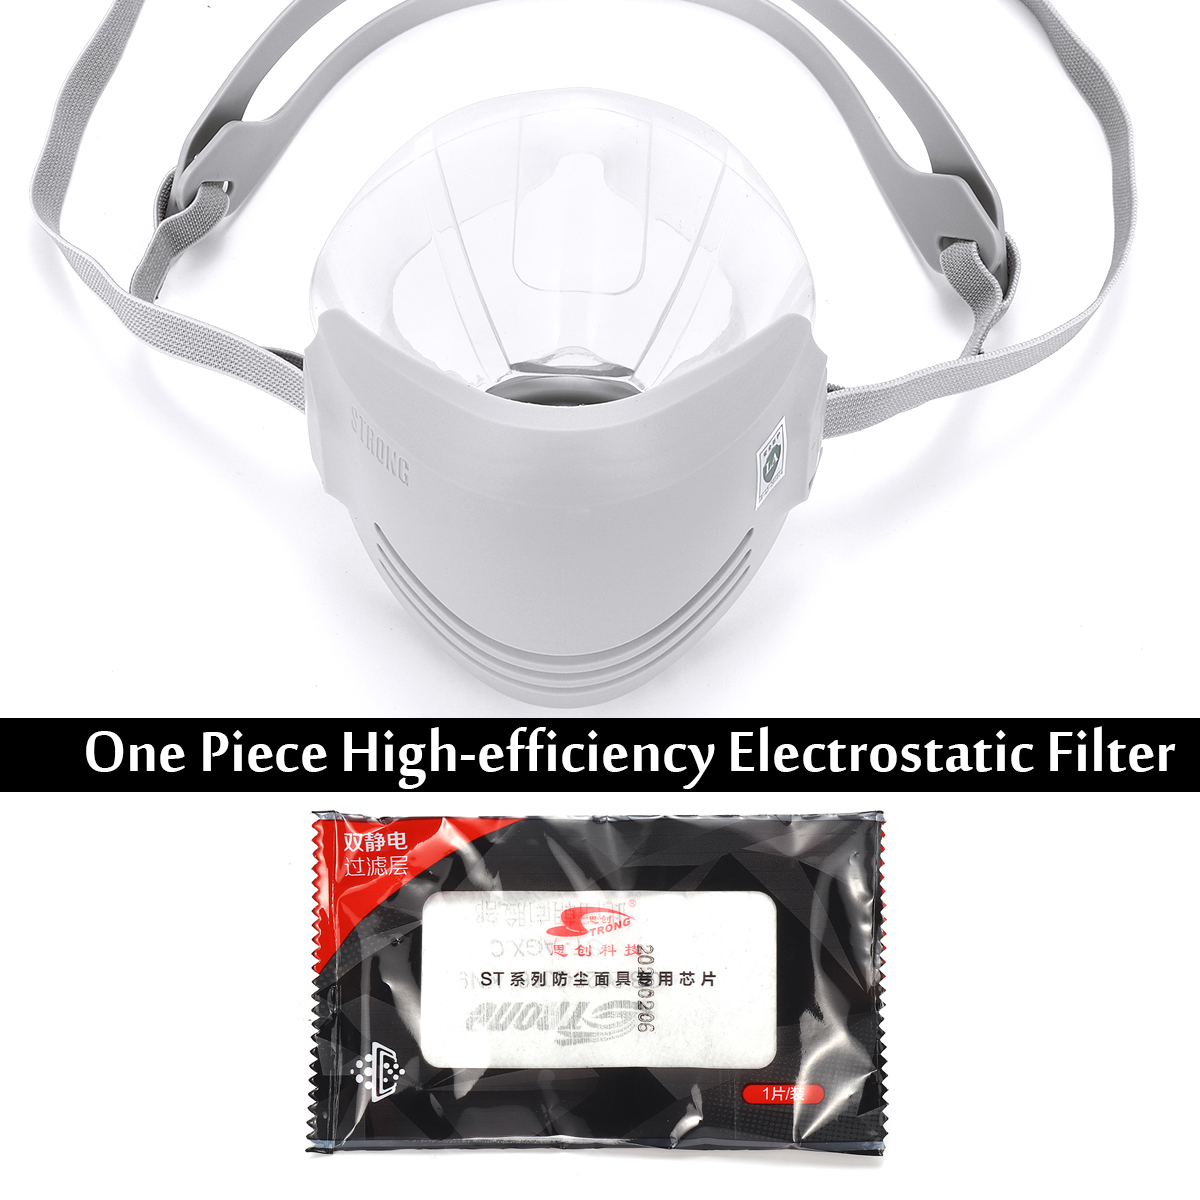 Anti-Dust-Face-Mask-Mouth-PM25-Anti-Fog-Haze-Respirator-with-Electrostatic-KN95-Filter-1659943-5